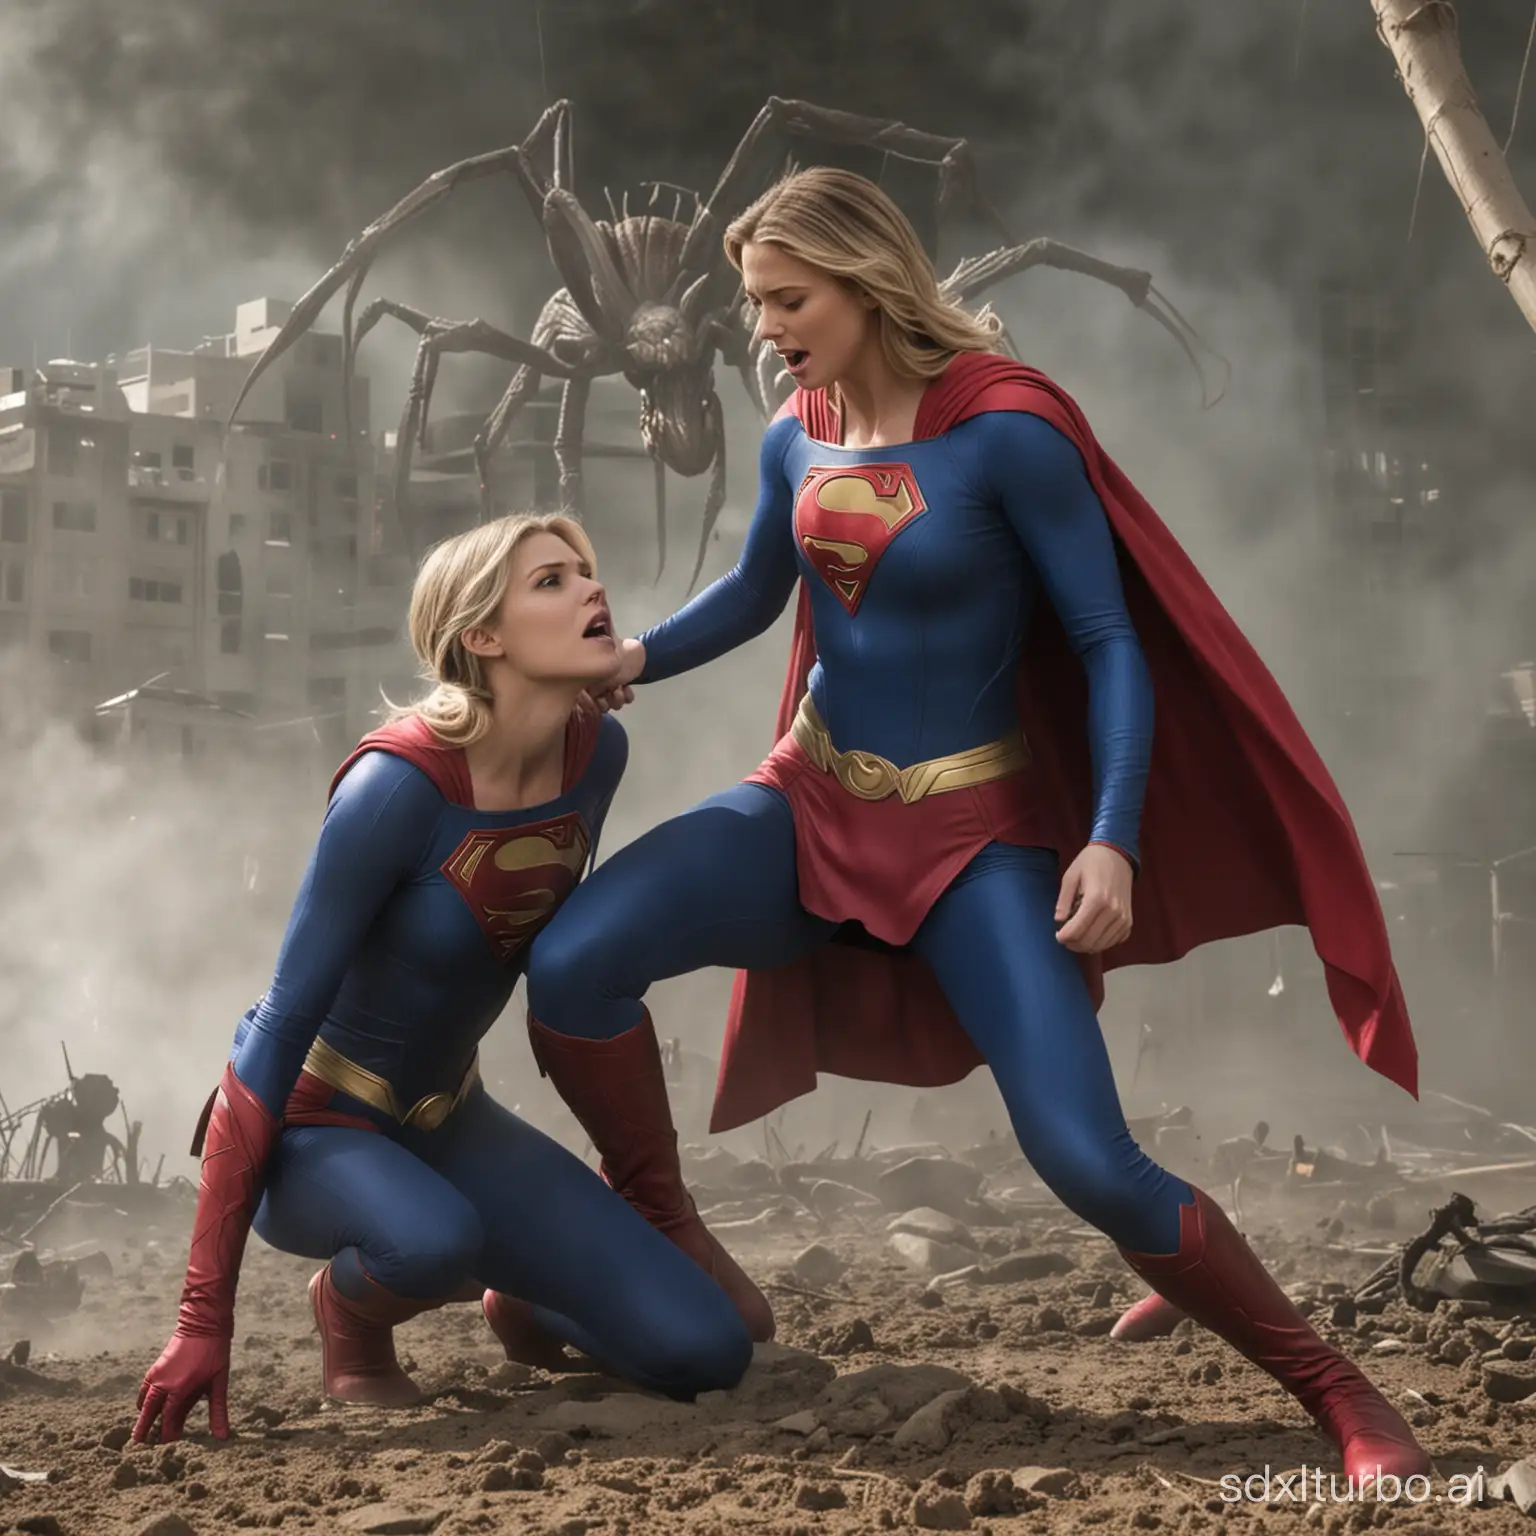 Supergirl-Confronting-Giant-Spider-in-Superman-Costume